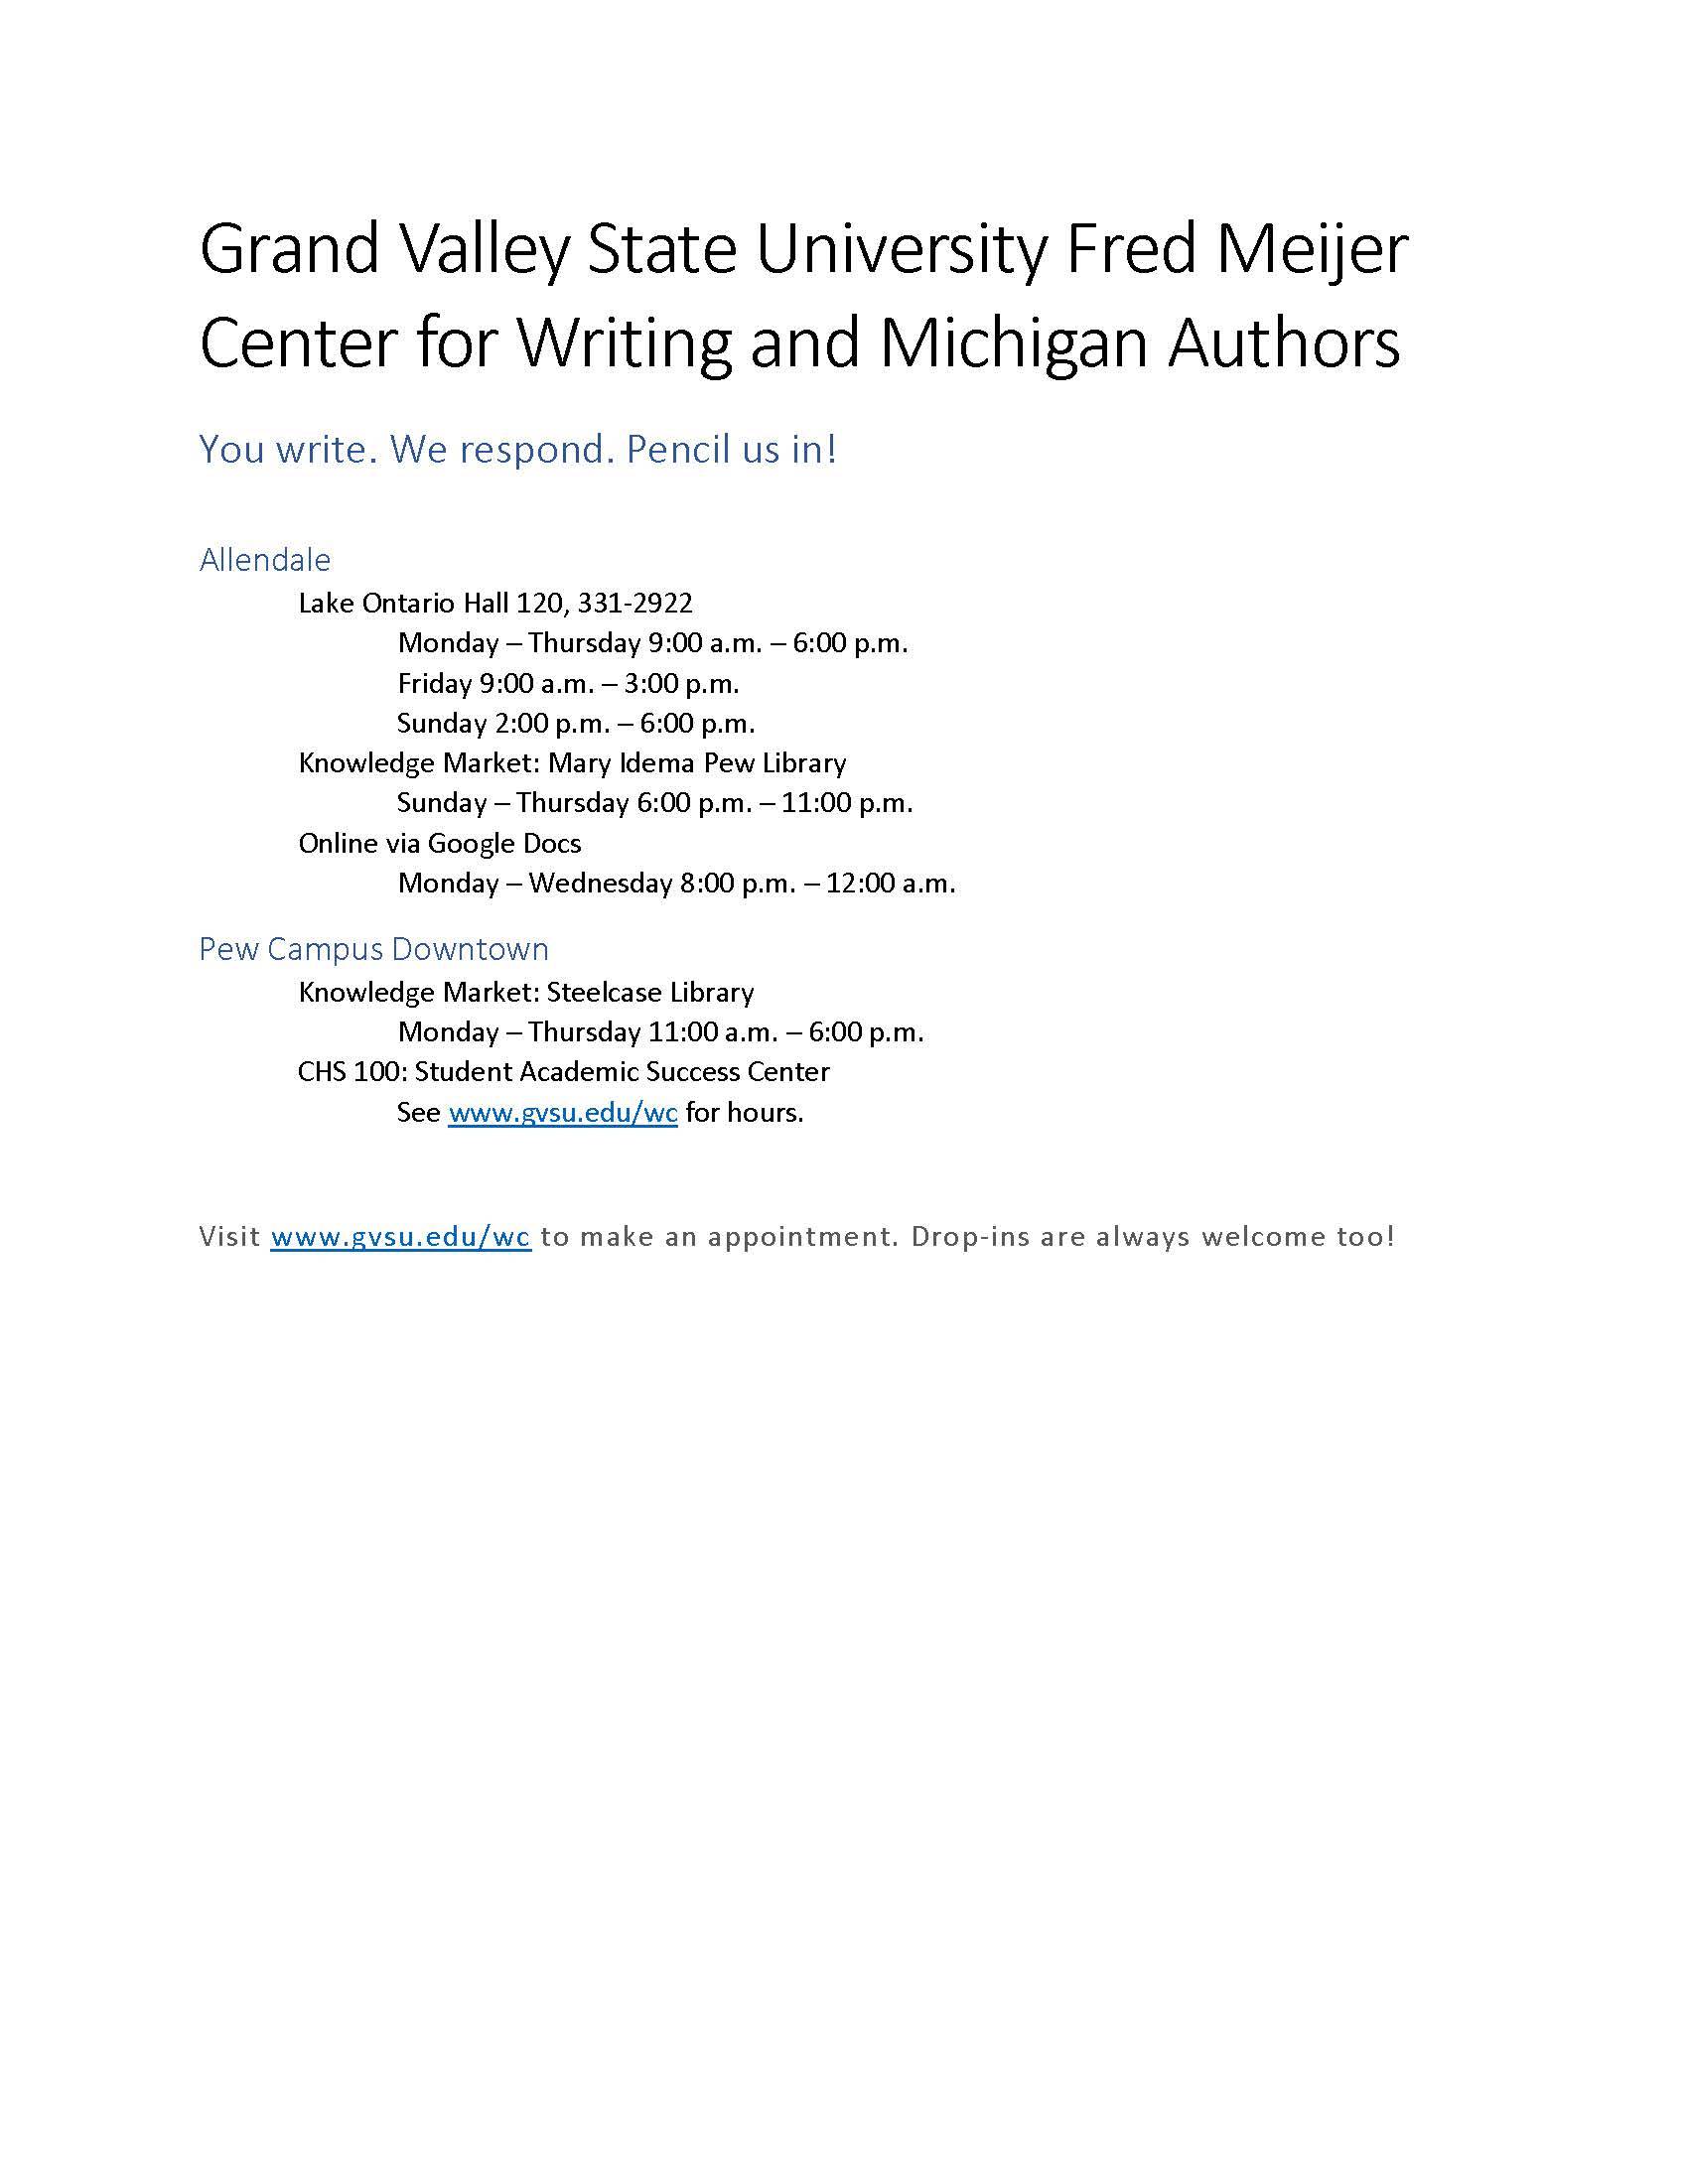 Accessible PDF version of Writing Center Handout for download